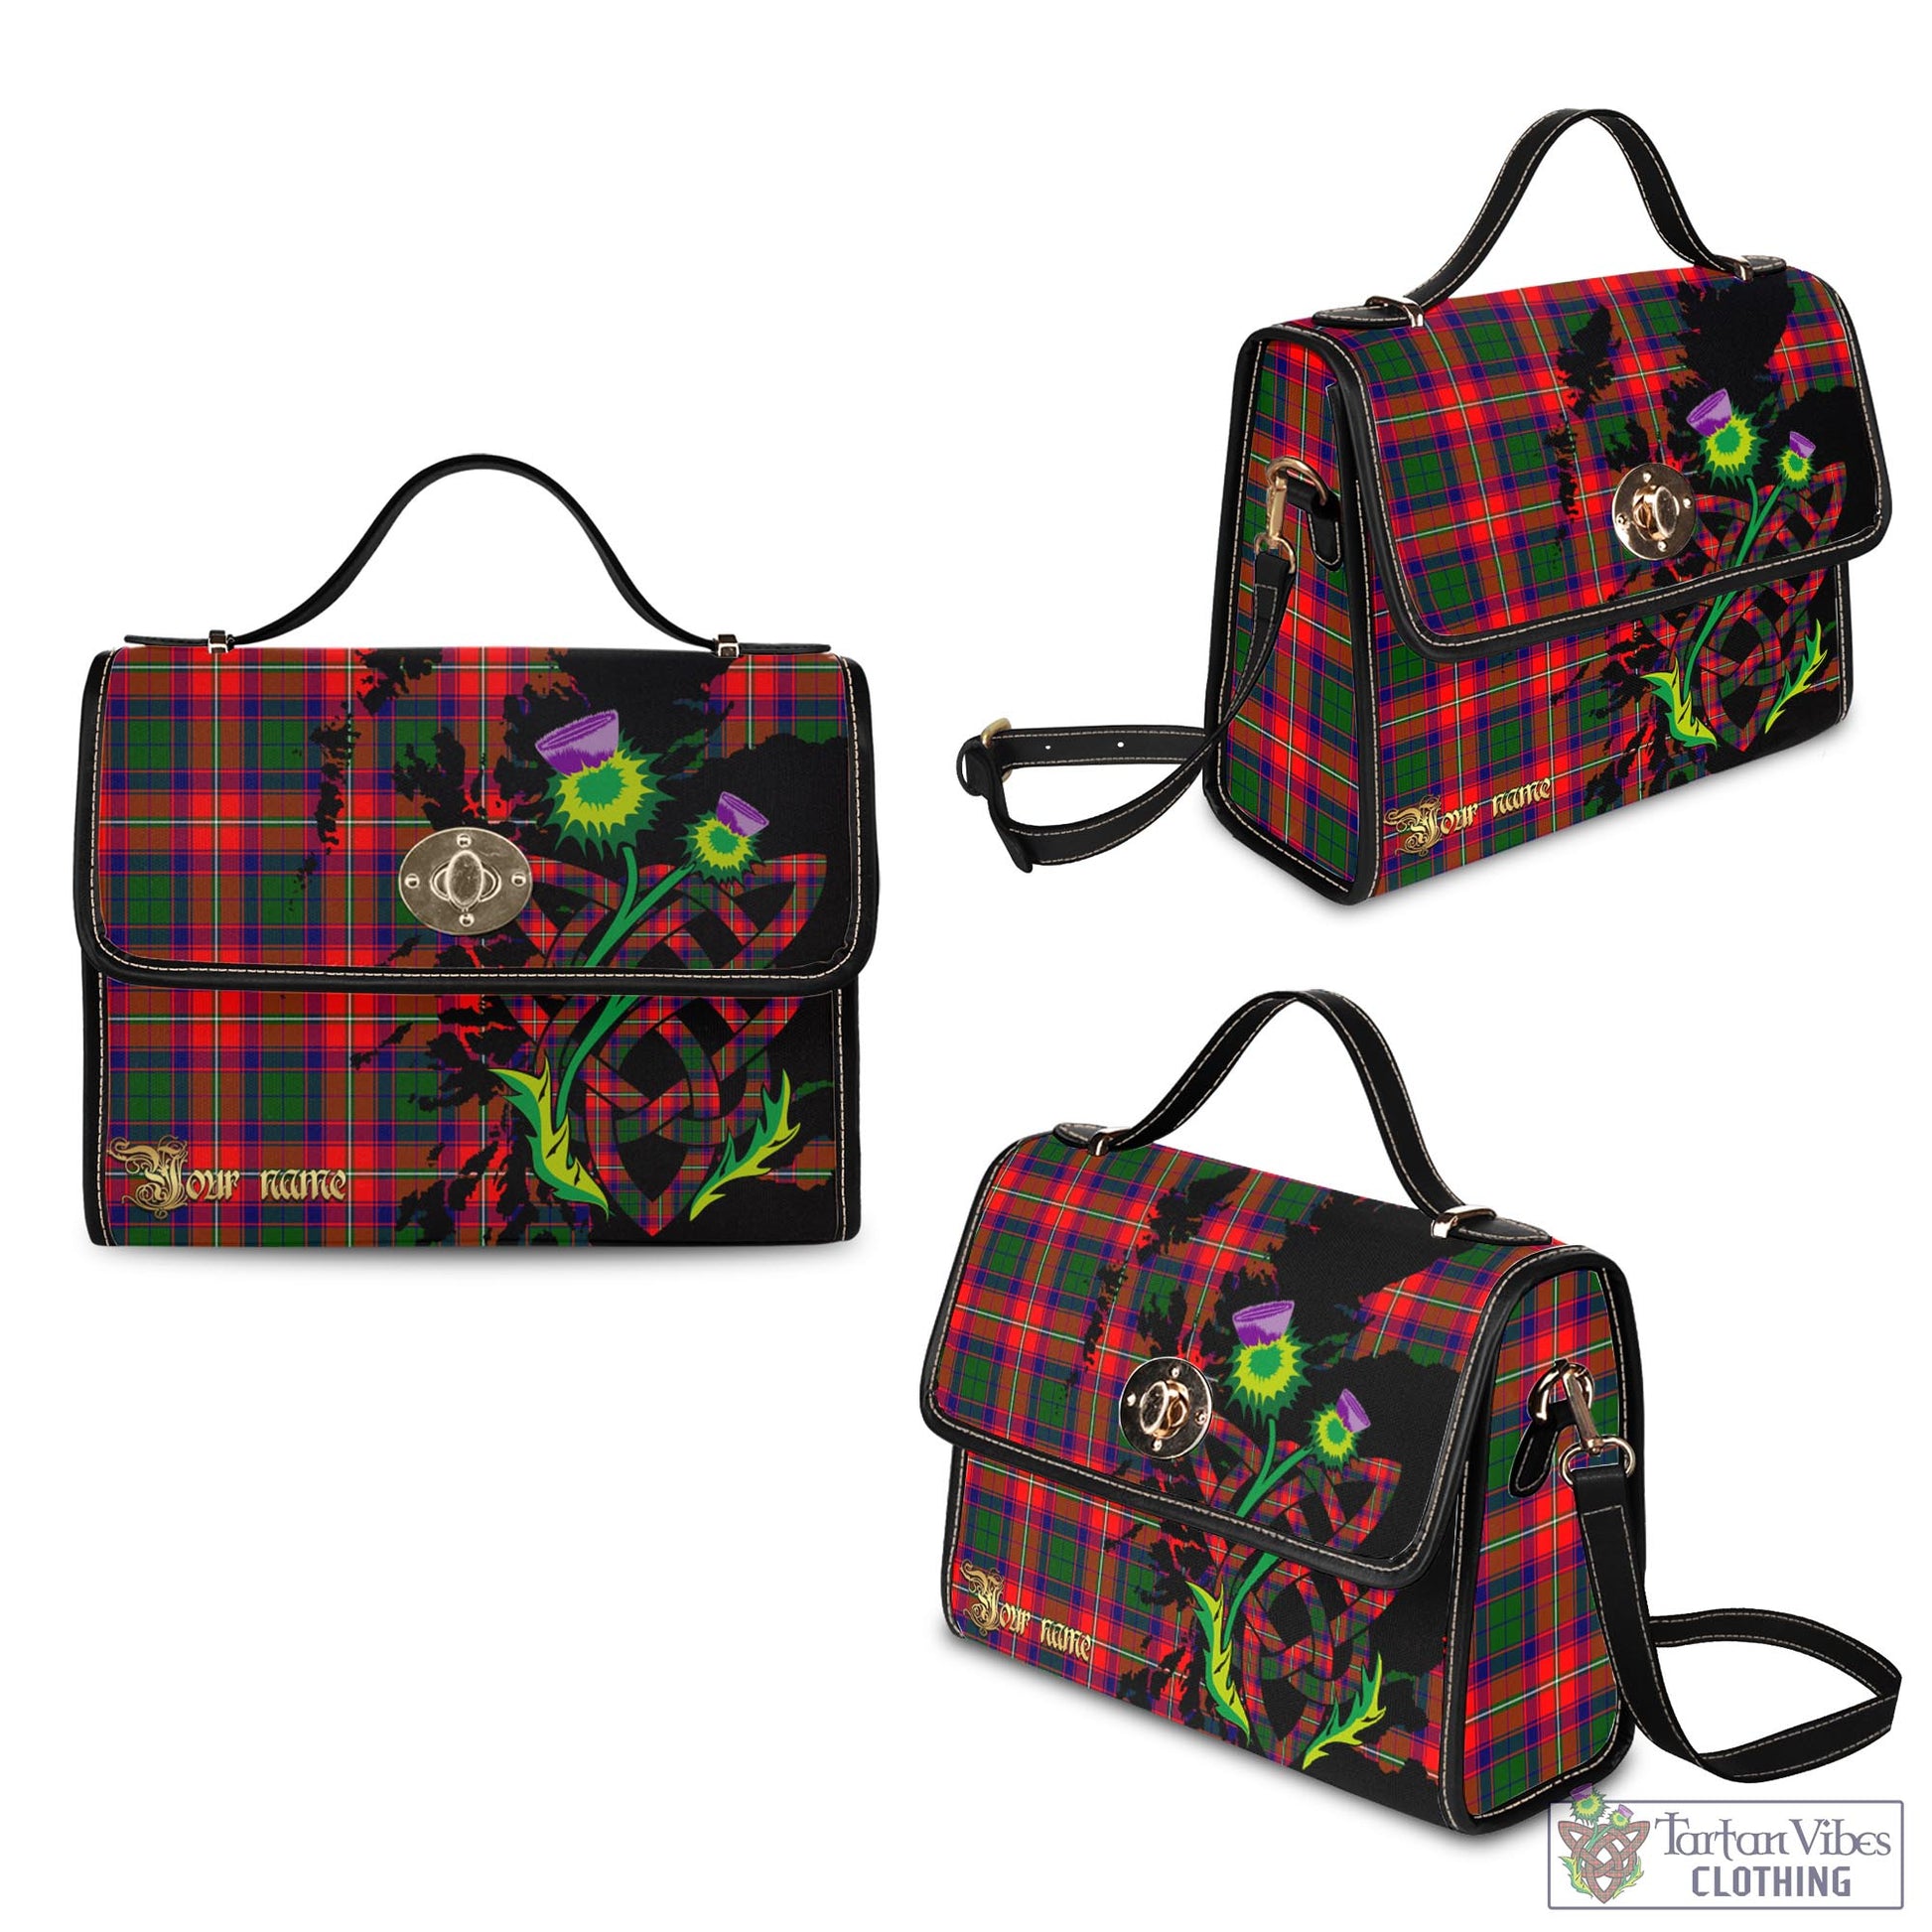 Tartan Vibes Clothing Riddell Tartan Waterproof Canvas Bag with Scotland Map and Thistle Celtic Accents